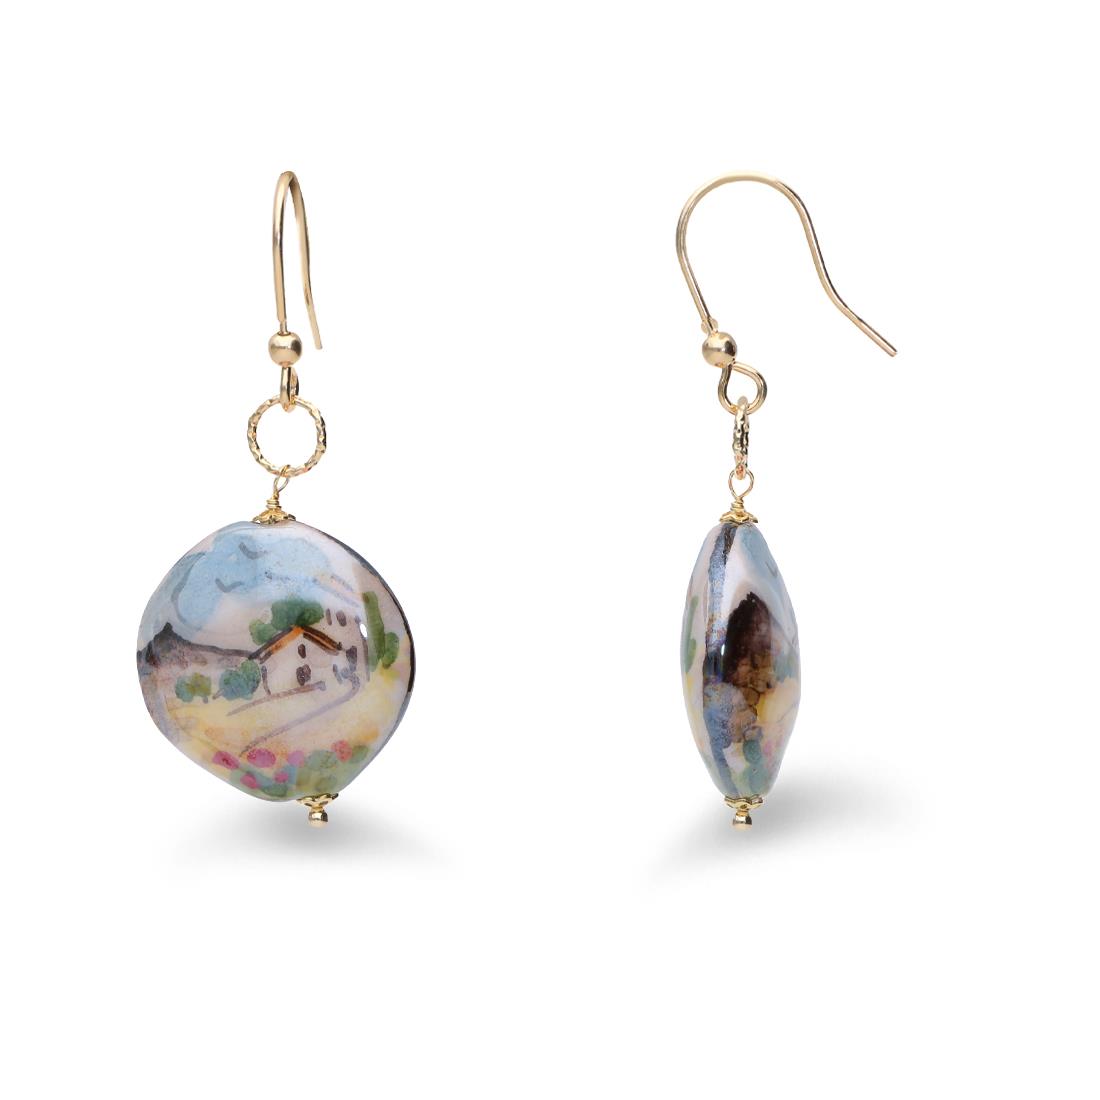 Pendant earrings in silver and ceramic with landscape - LE PERLE DI CALTAGIRONE